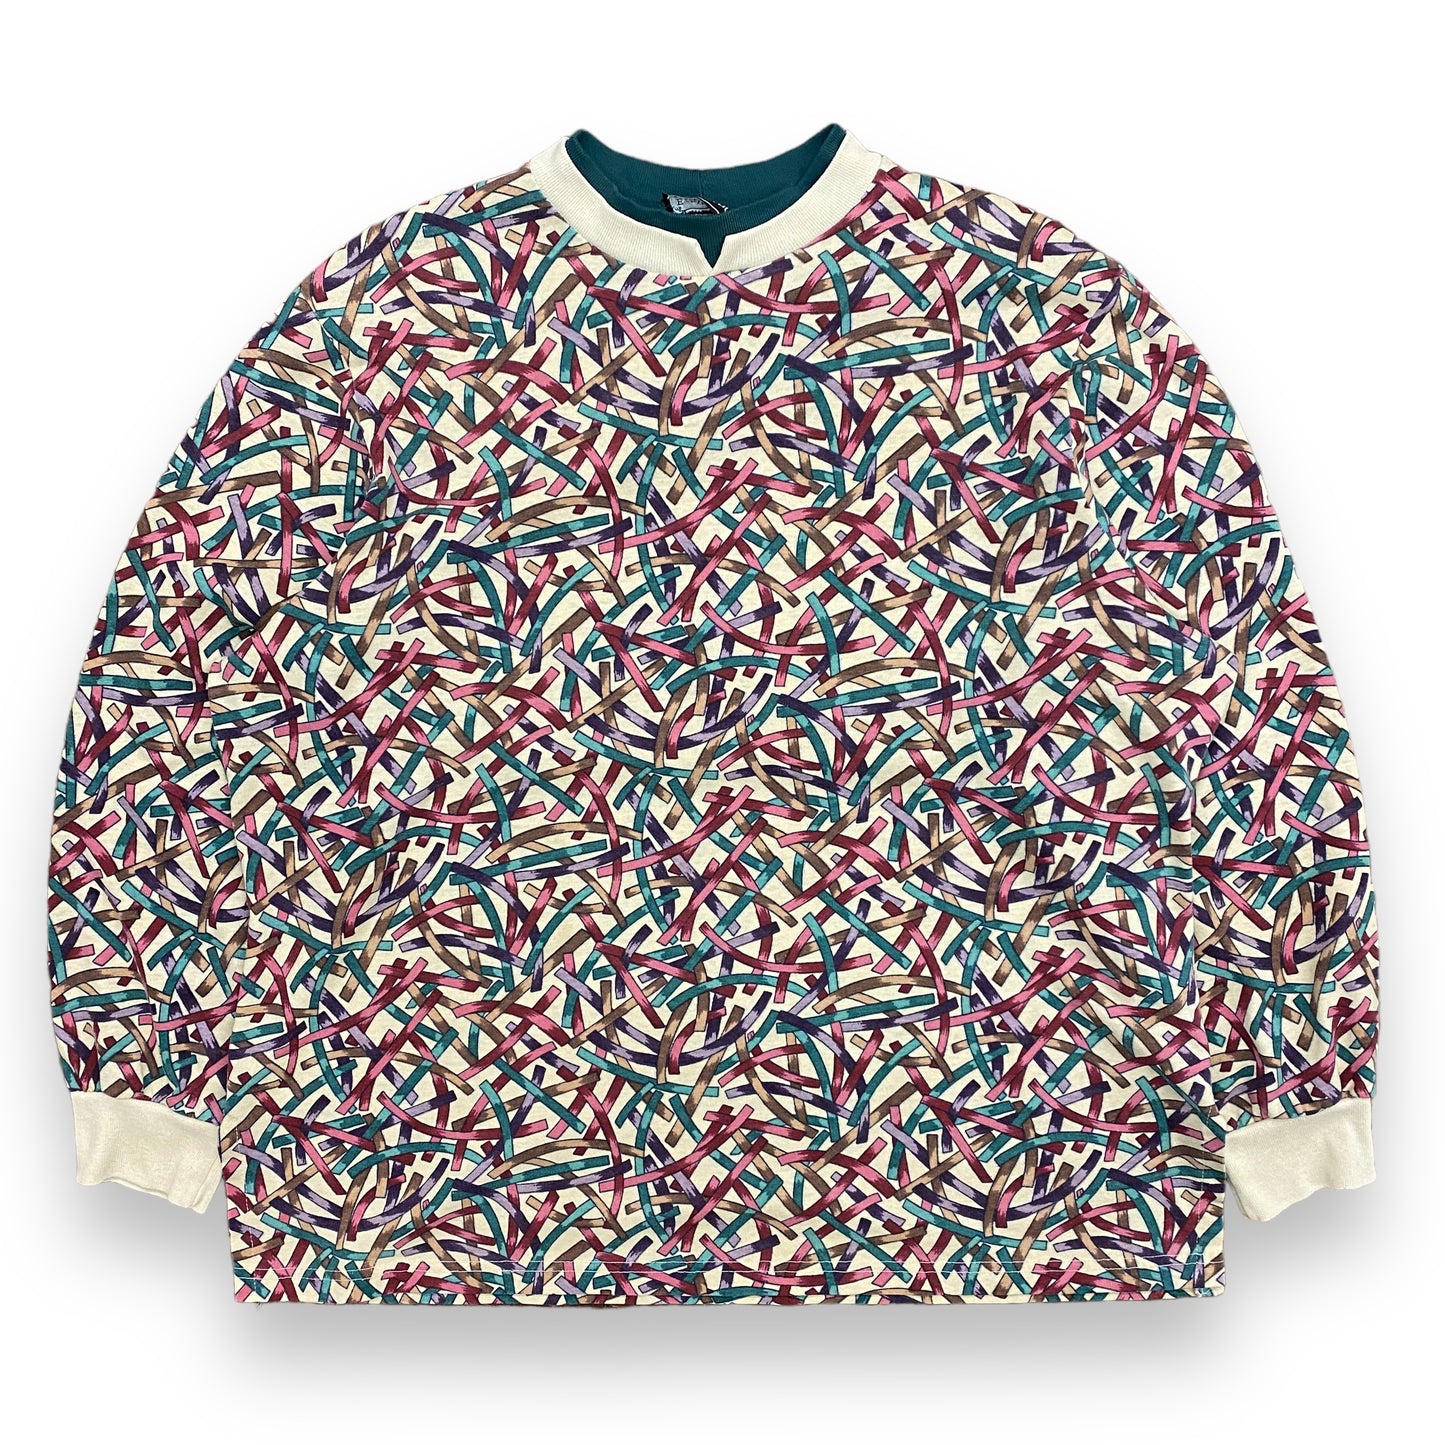 90s All-Over-Print "Confetti" Long Sleeve - Size Large